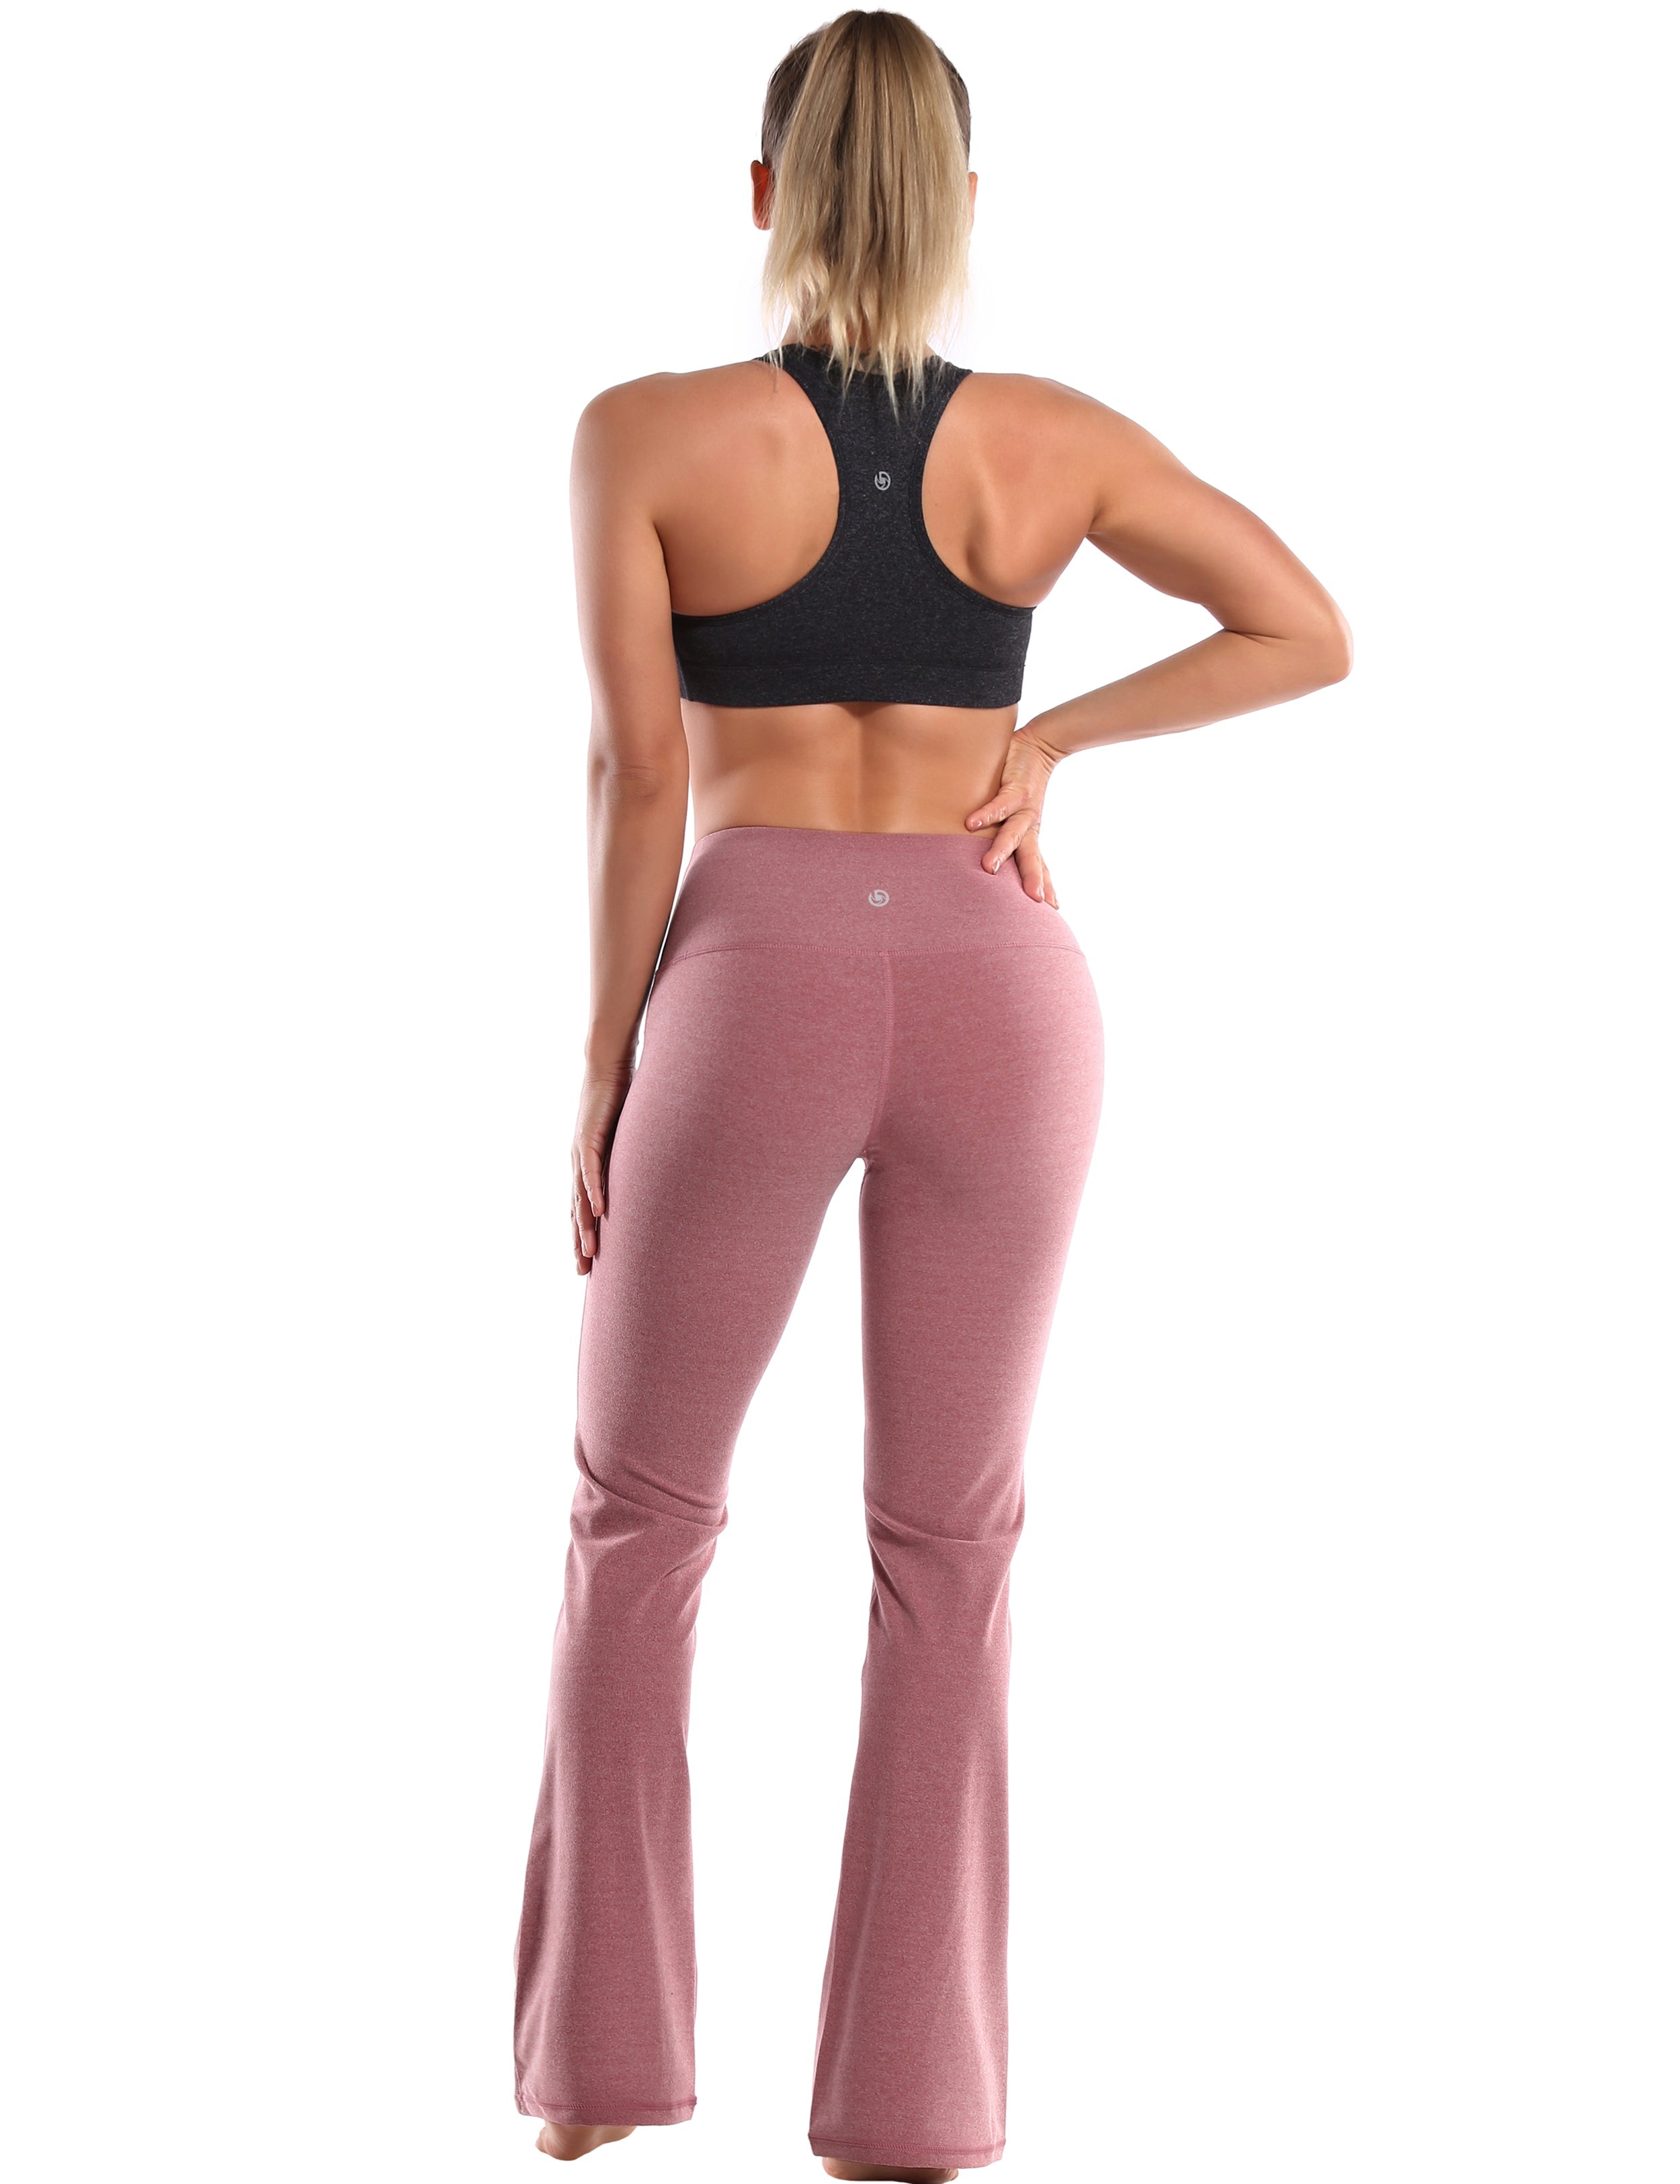 096 High Waist Bootcut Leggings heatherred38%Nylon+36%Polyester+26%Spandex,250gsm Fabric doesn't attract lint easily 4-way stretch No see-through Moisture-wicking Tummy control Inner pocket Five lengths